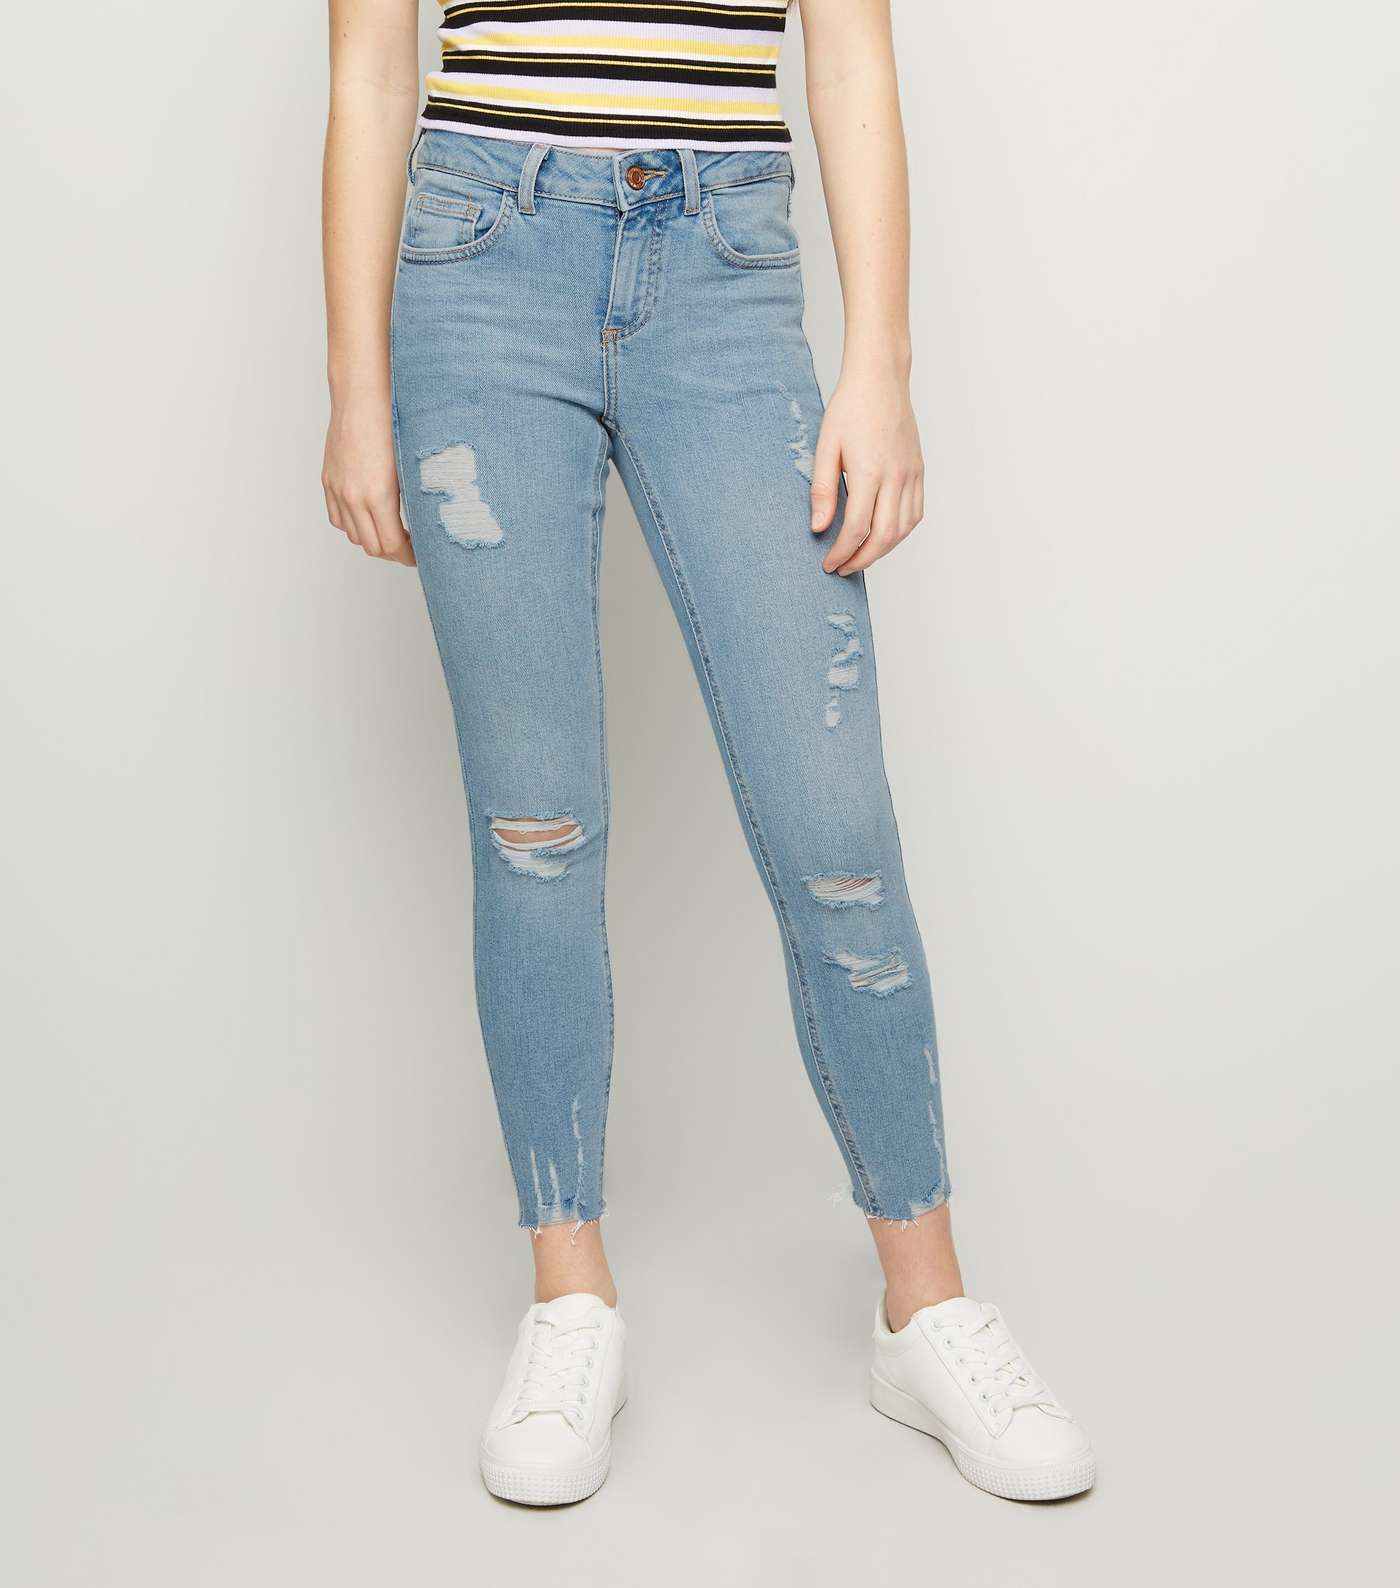 Girls Pale Blue Ripped High Waist Skinny Jeans  Image 2